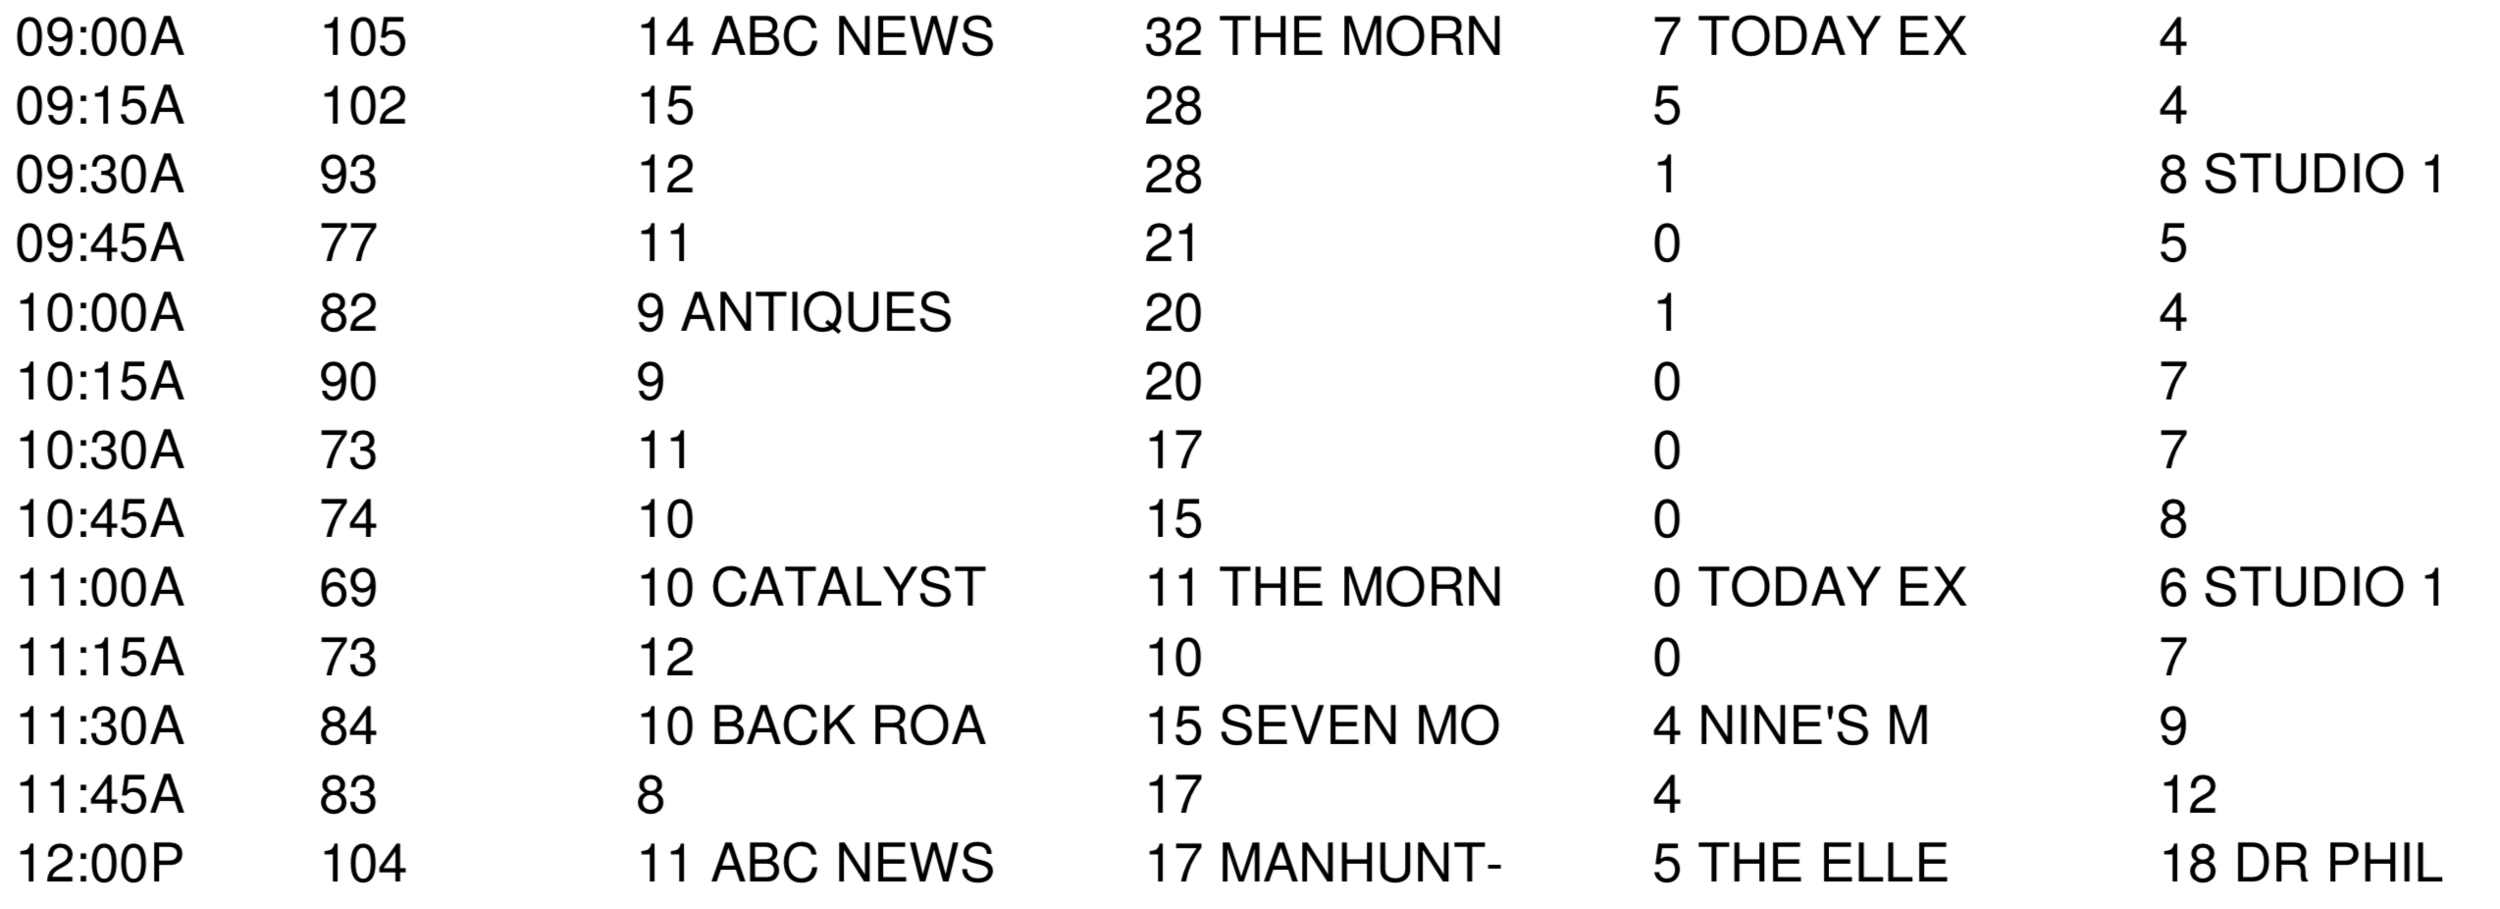   The 15 minute breakdown for THE MORNING SHOW and TODAY EXTRA in Perth on Tuesday 2 April 2019 (numbers are in ‘000s)  